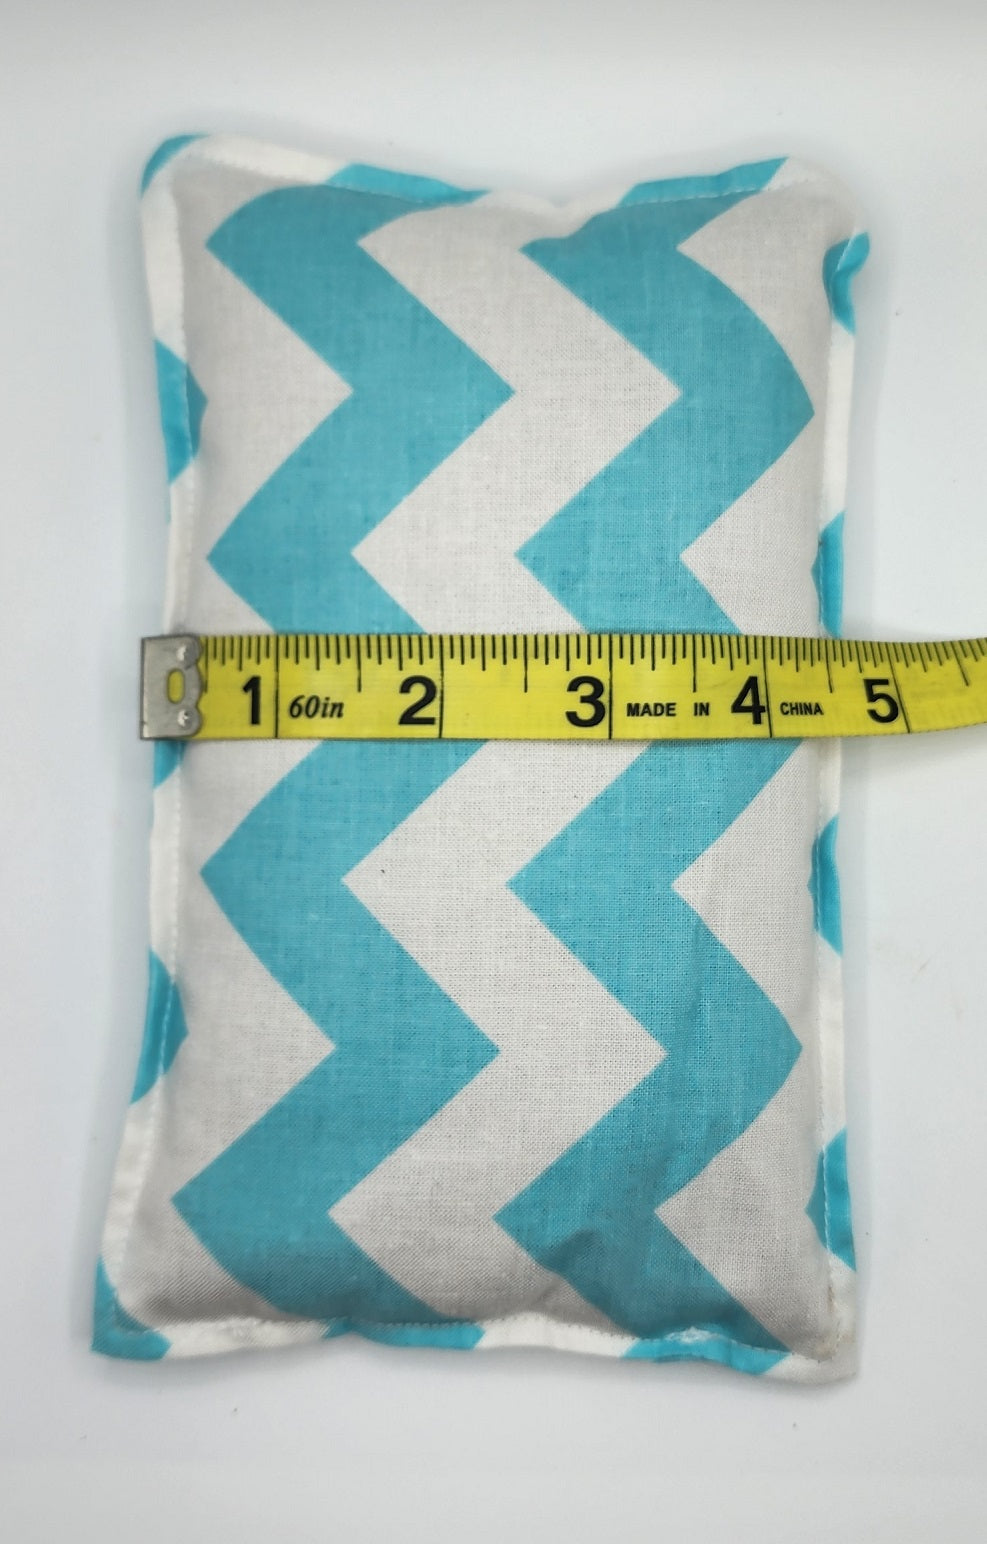 Blue Chevron Flaxseed Aromatherapy PEPPERMINT Eye / Forehead Pillow / Headache Helper / Cold Pack/ Hot Pad